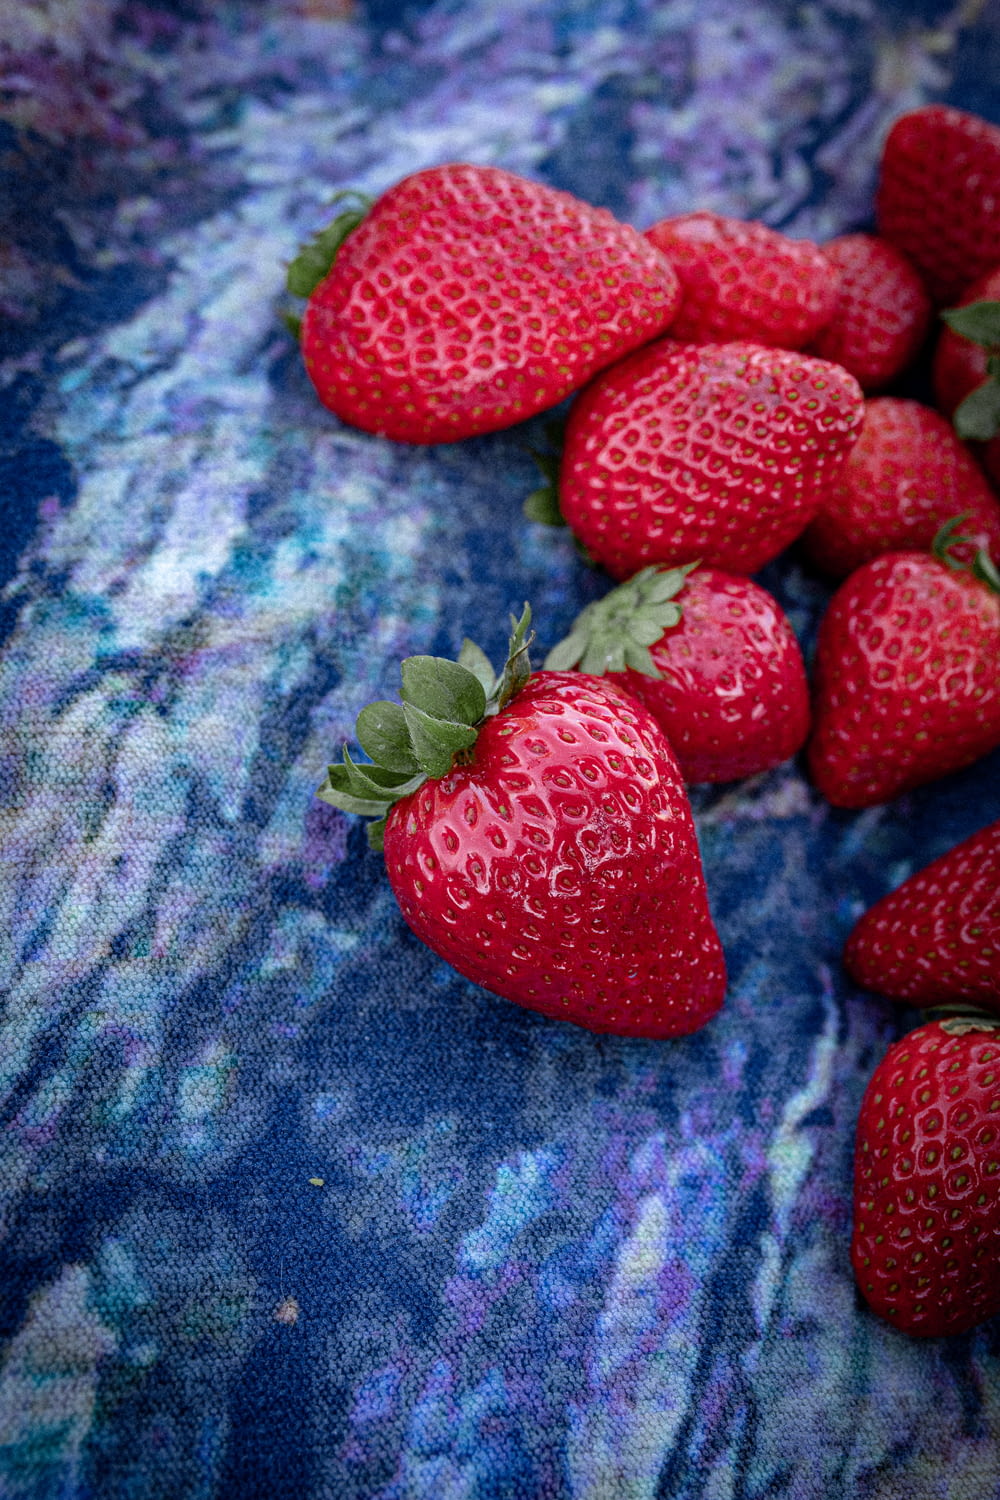 red strawberries on blue and white textile